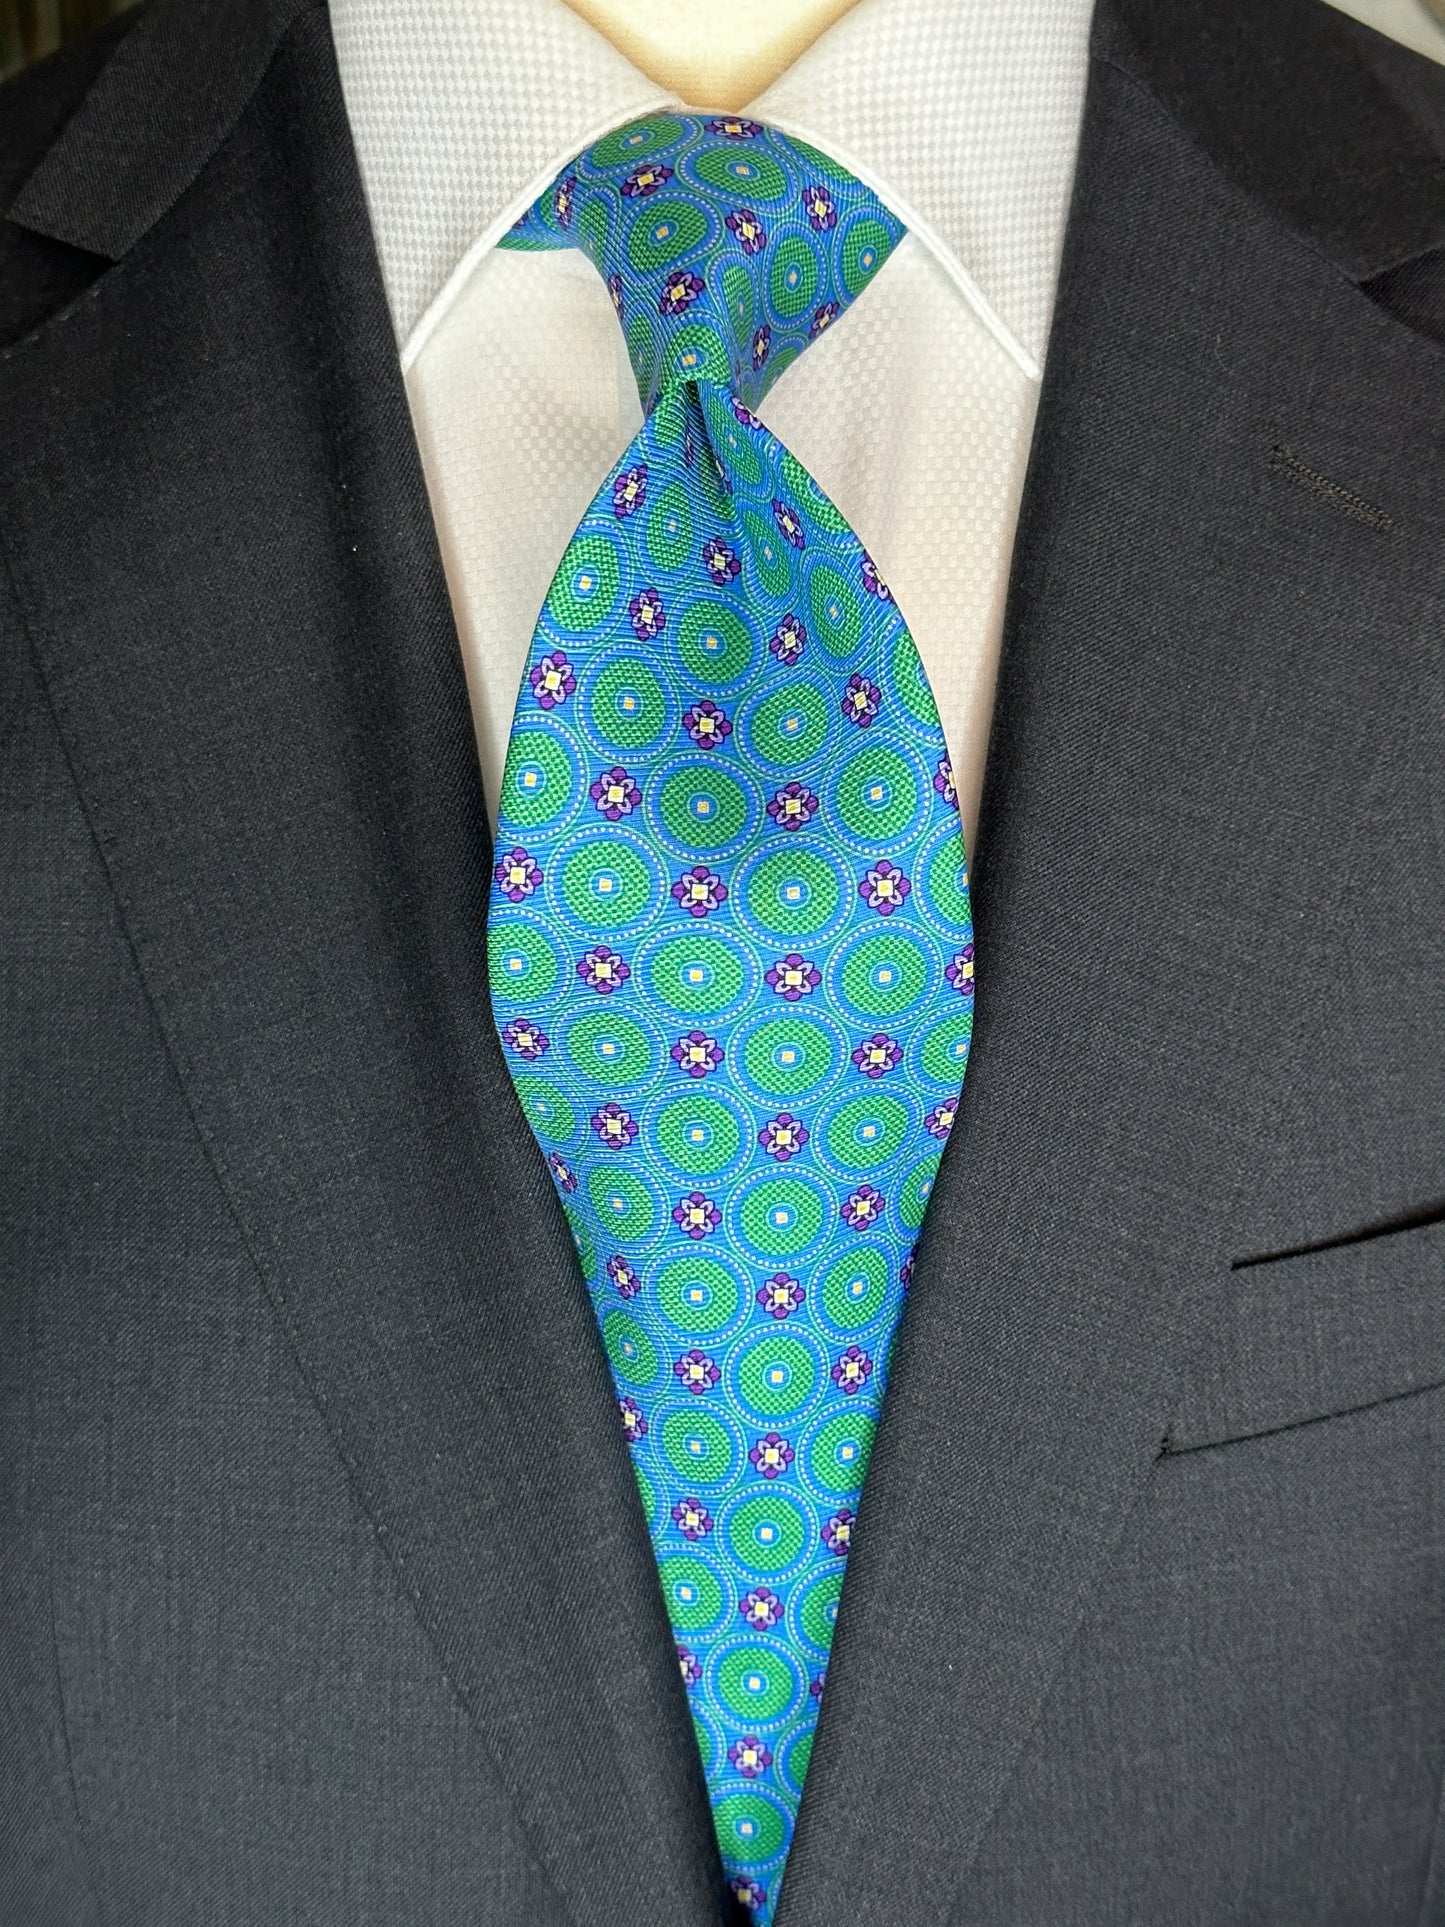 This tie with circular medallions in green surrounded by a beautiful blue background is 100% silk. Paired with dark suits and stripes this necktie allows for great soft contrast on white or sky blue and grey dress shirts. Try the sister tie in pink and blue for more combinations.